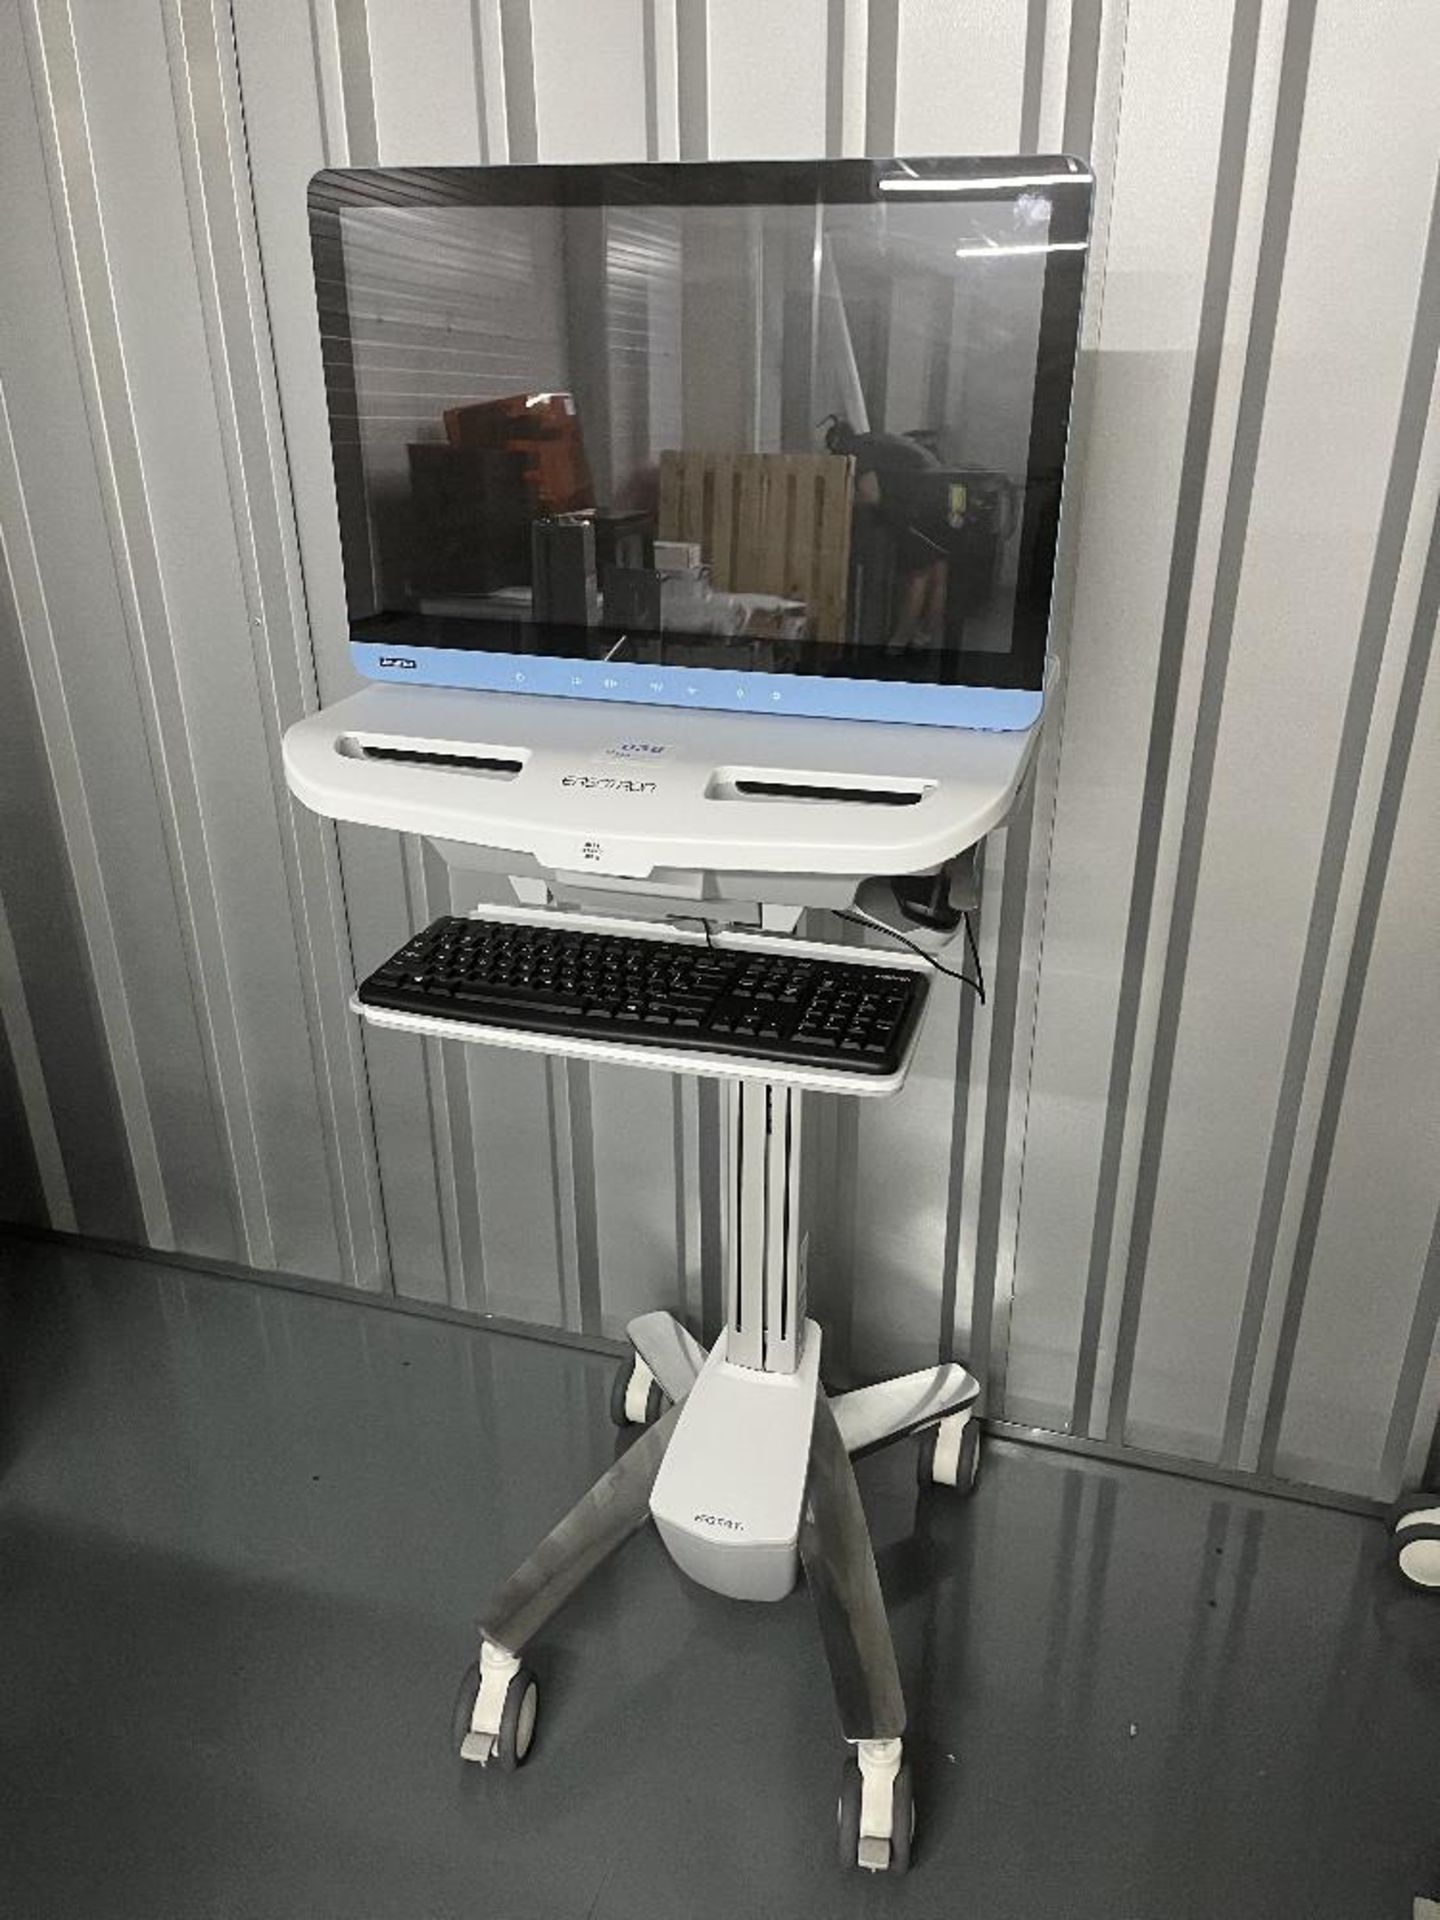 Ergotron Styleview Cart Type SV41-6200-0 Full Featured Medical Cart with Advantech POC-624-01 AIO PC